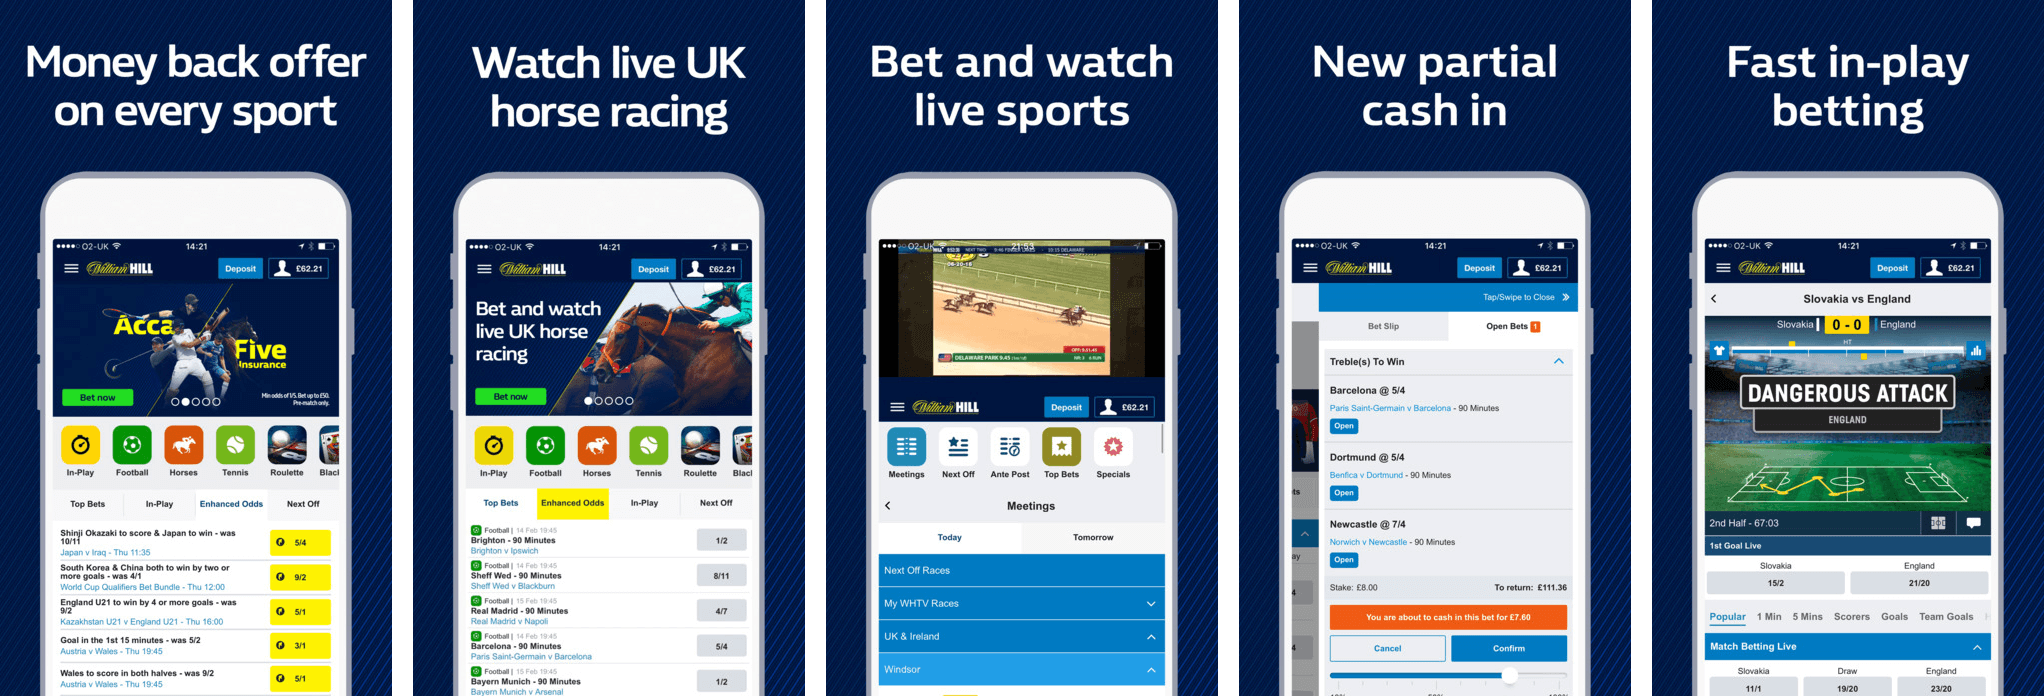 WilliamHill Sports Betting Review